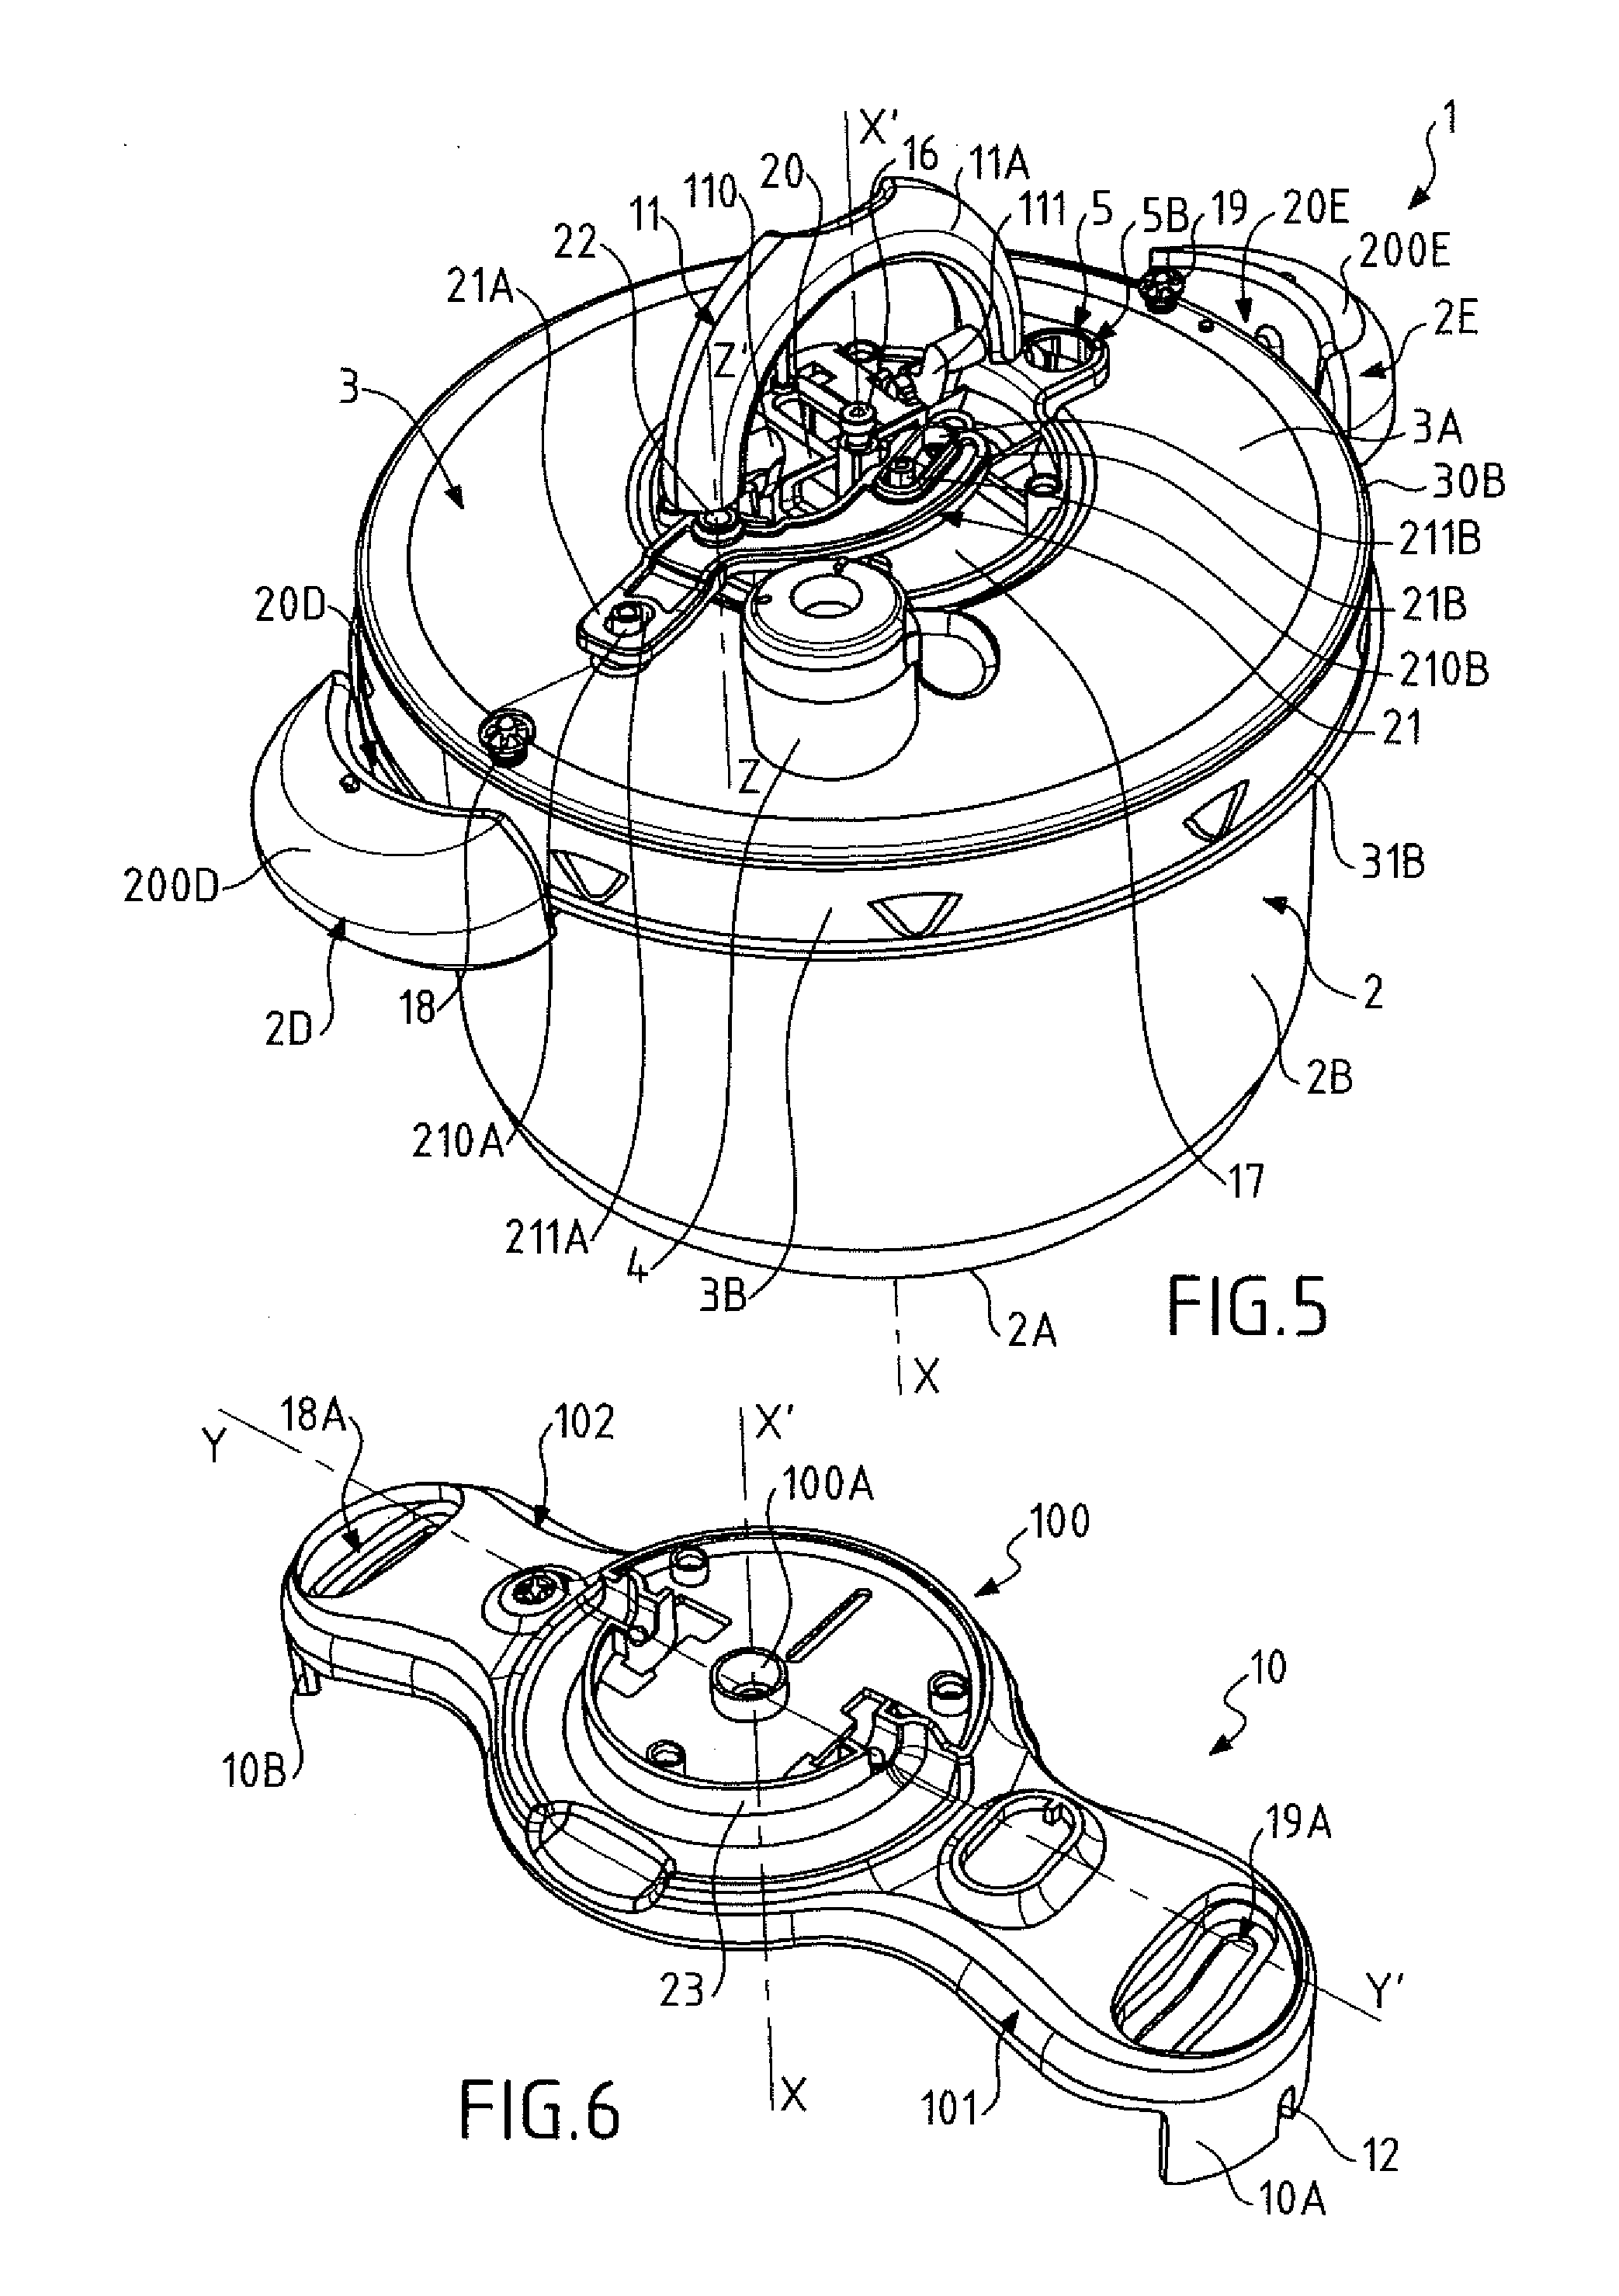 Bayonet-fitting pressure cooker provided with a vessel handle